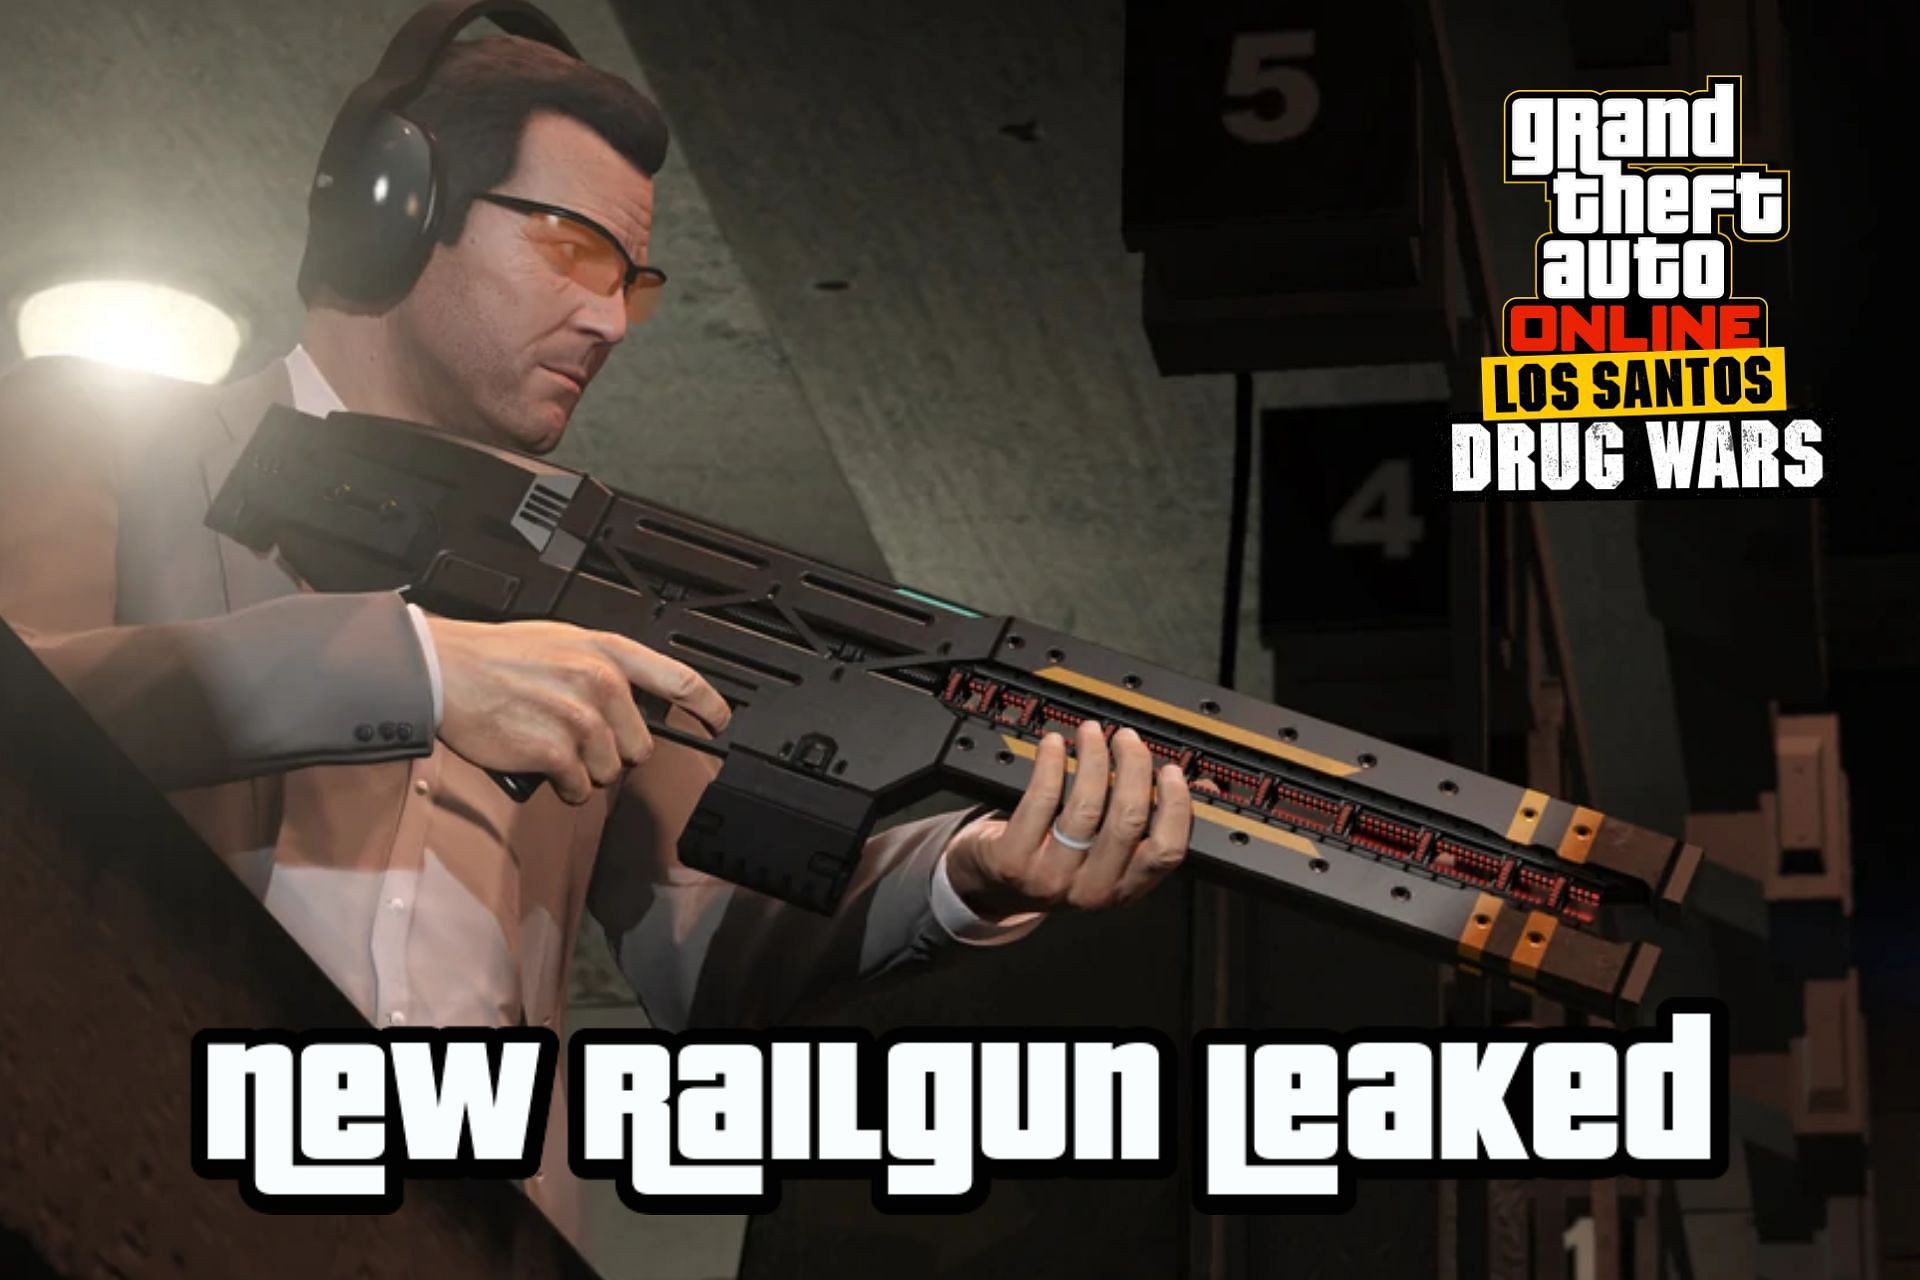 The Railgun is coming to GTA Online with some nerfs (Image via Rockstar Games)